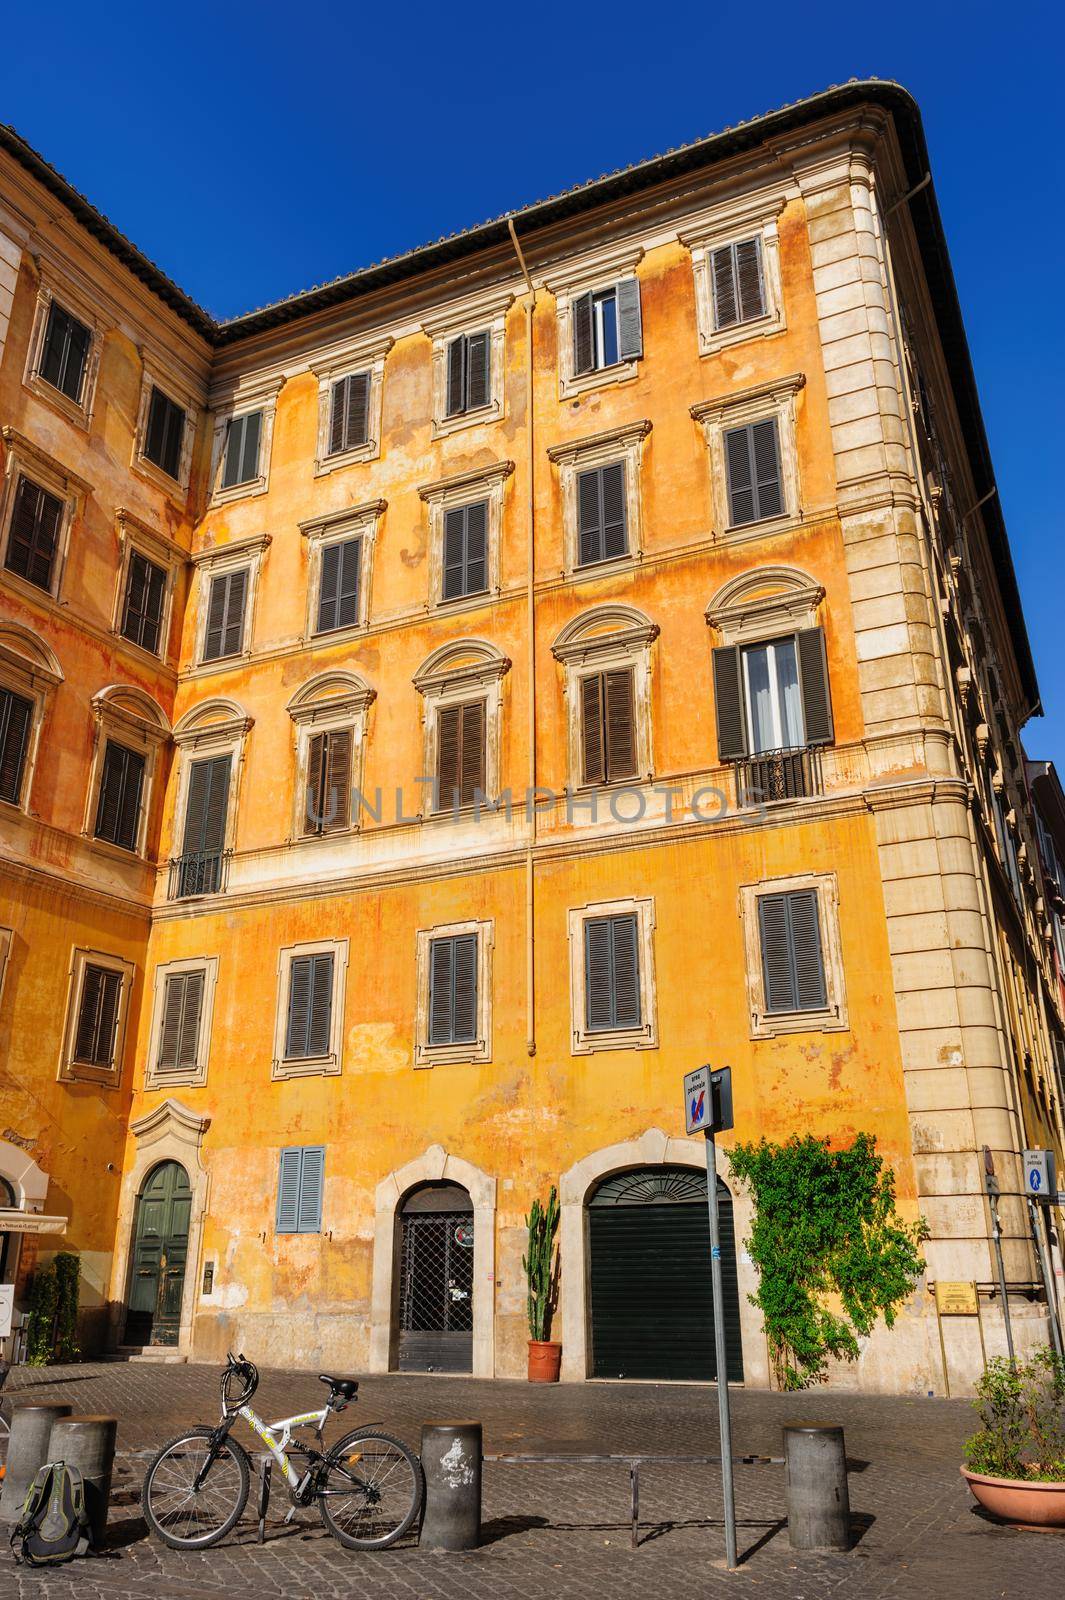 Typical view of usual old residential buildings in Rome, Italy by starush